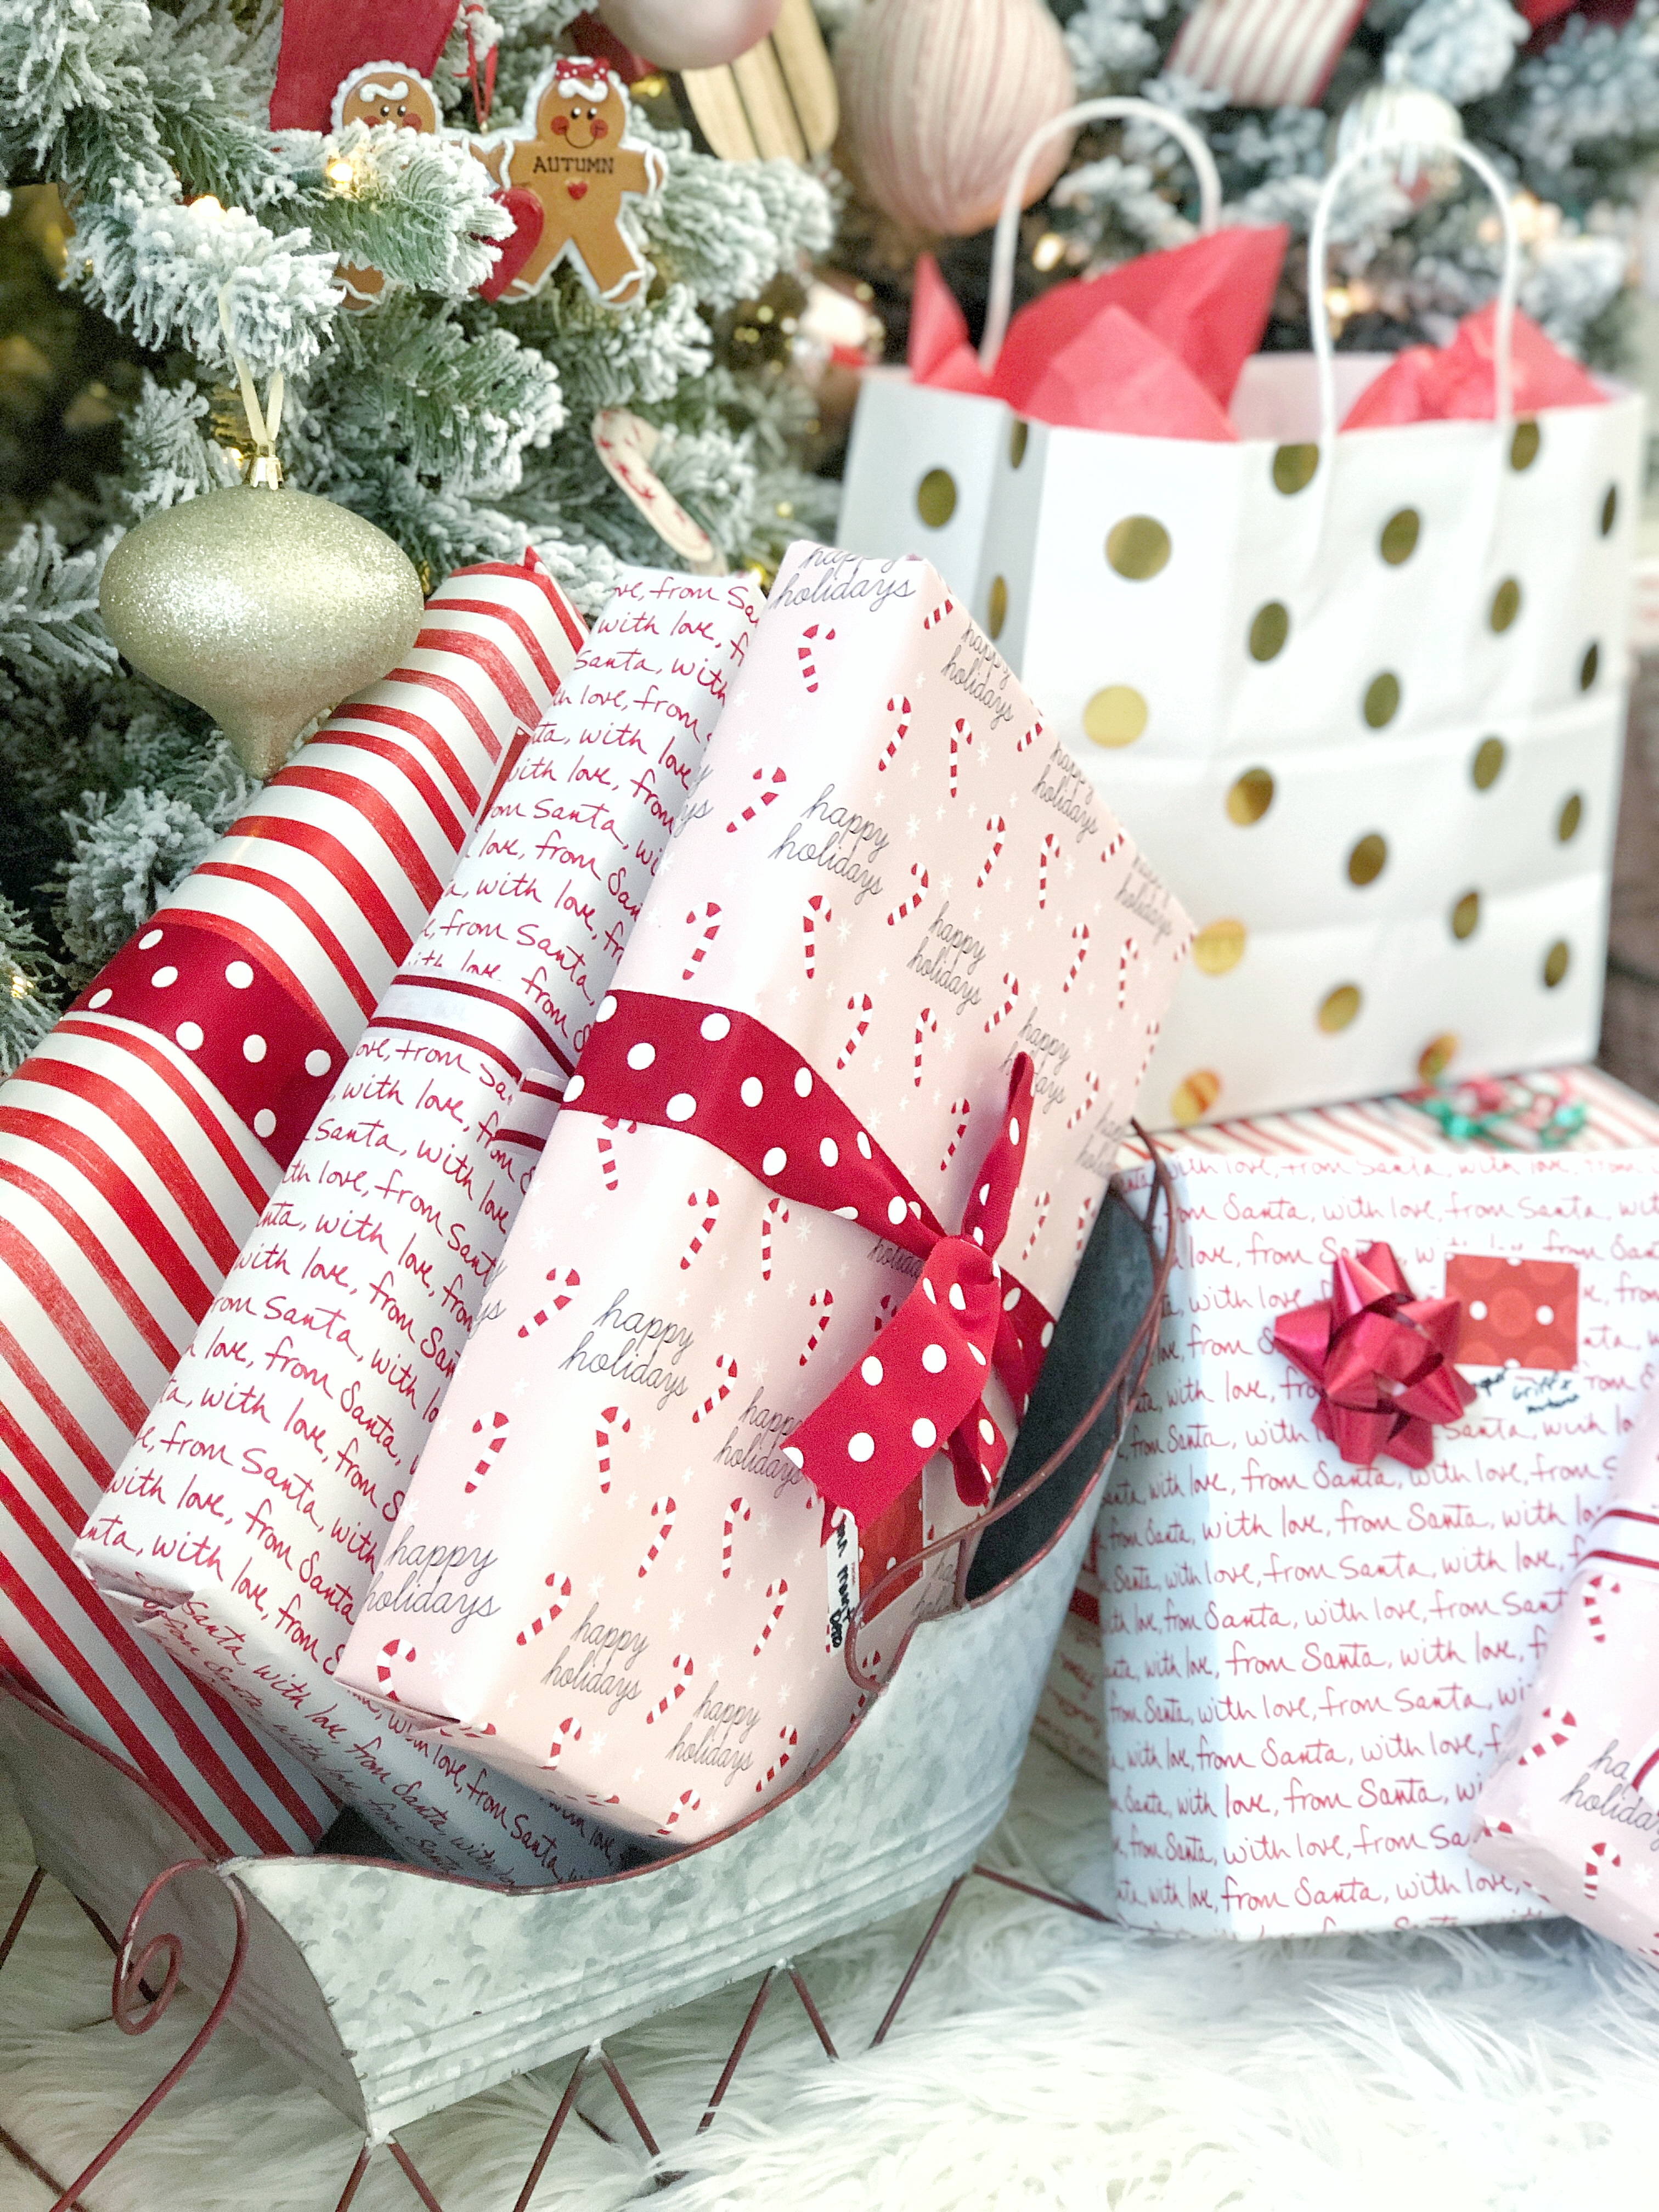 How to make wrapping paper Christmas trees